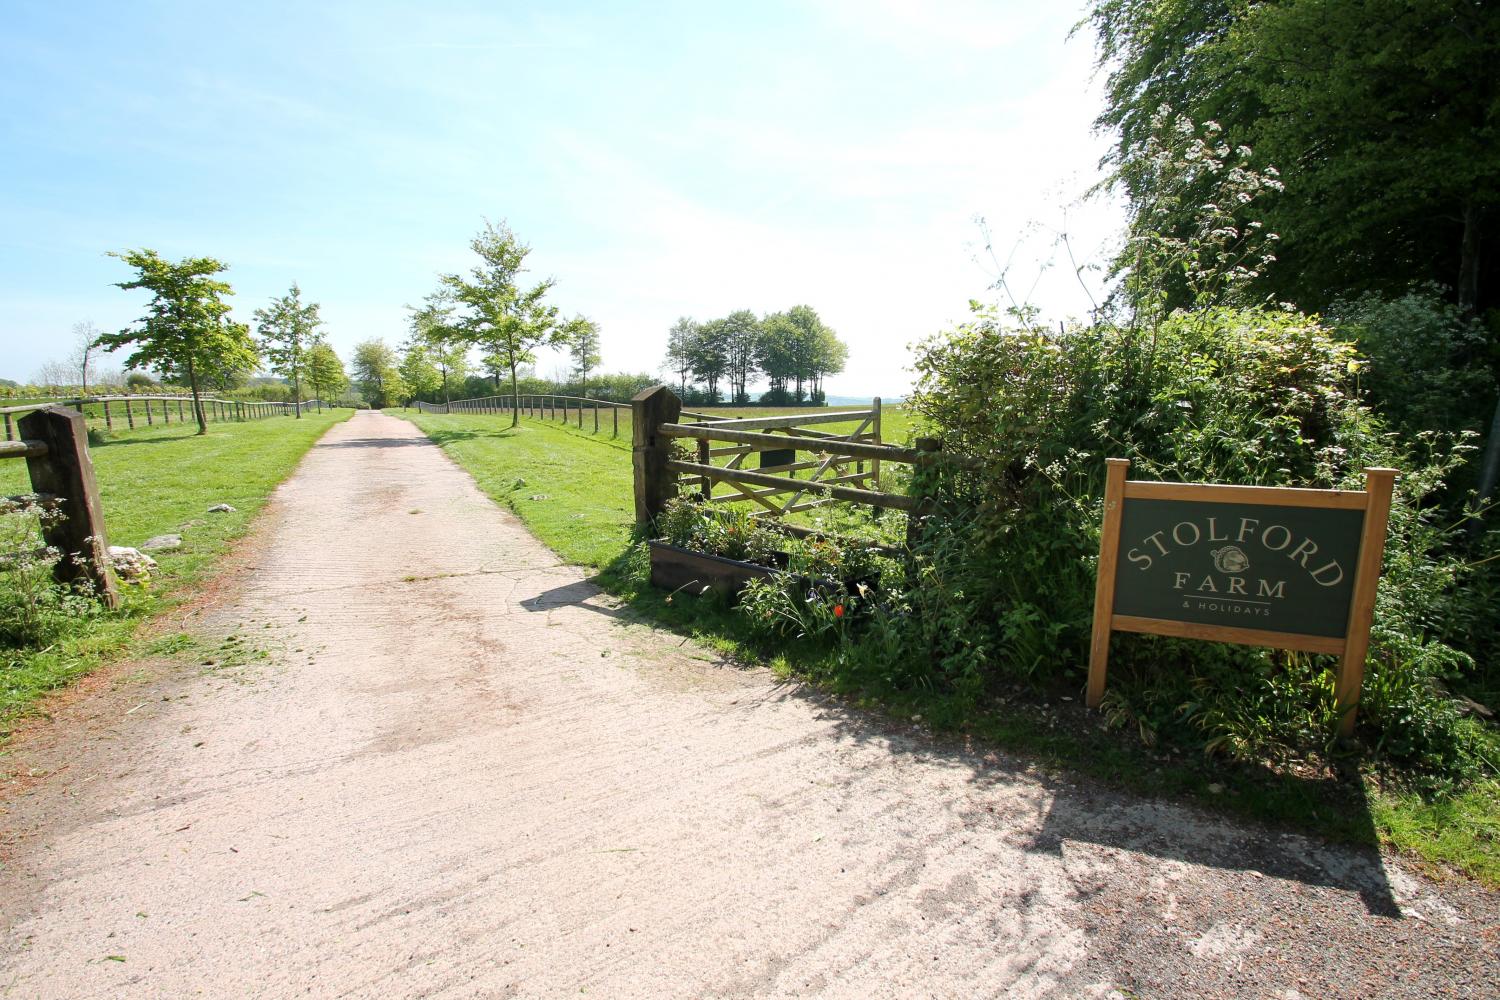 Middle Stolford main gate